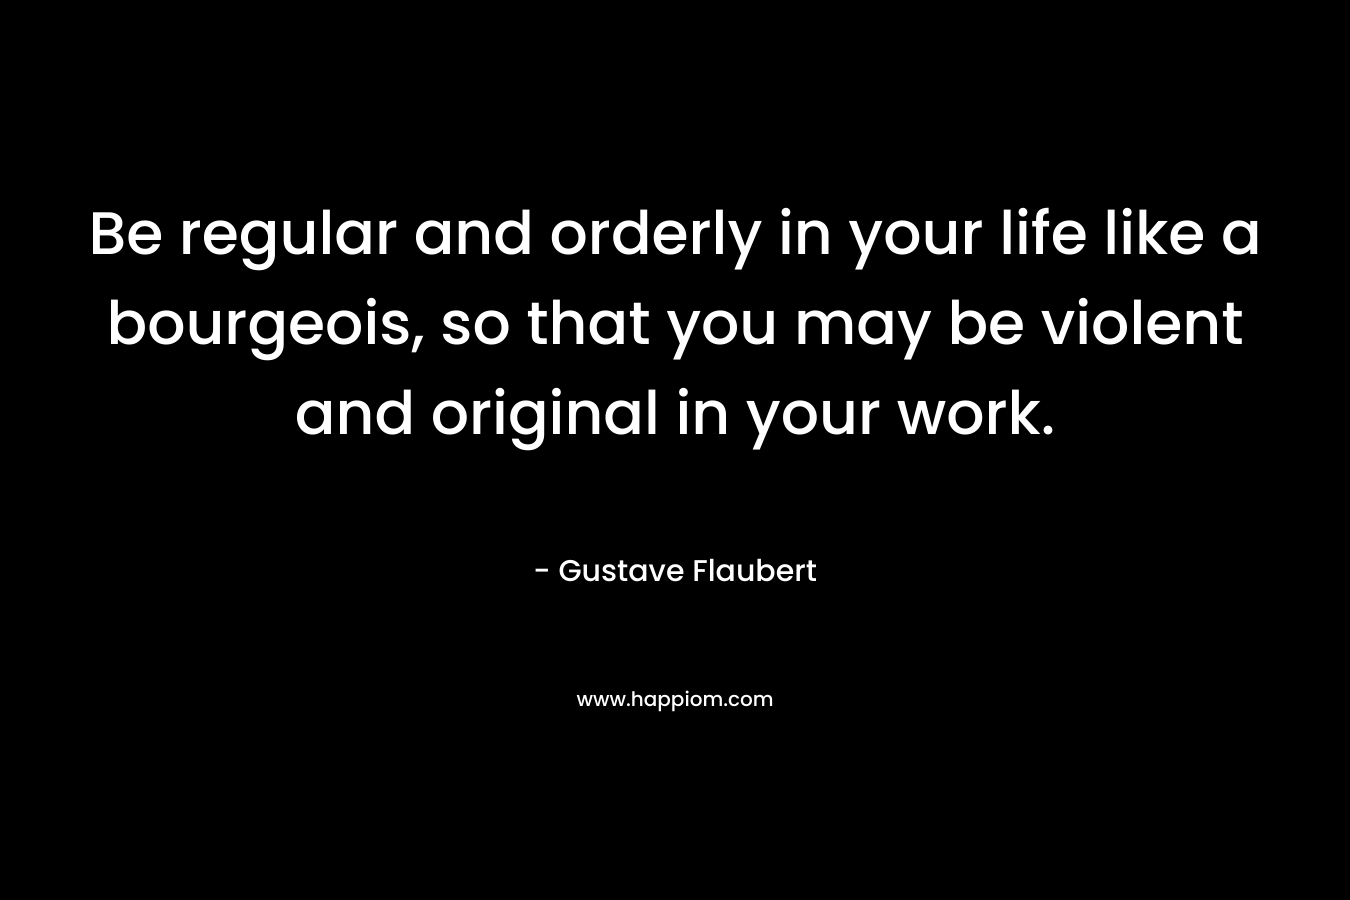 Be regular and orderly in your life like a bourgeois, so that you may be violent and original in your work. – Gustave Flaubert